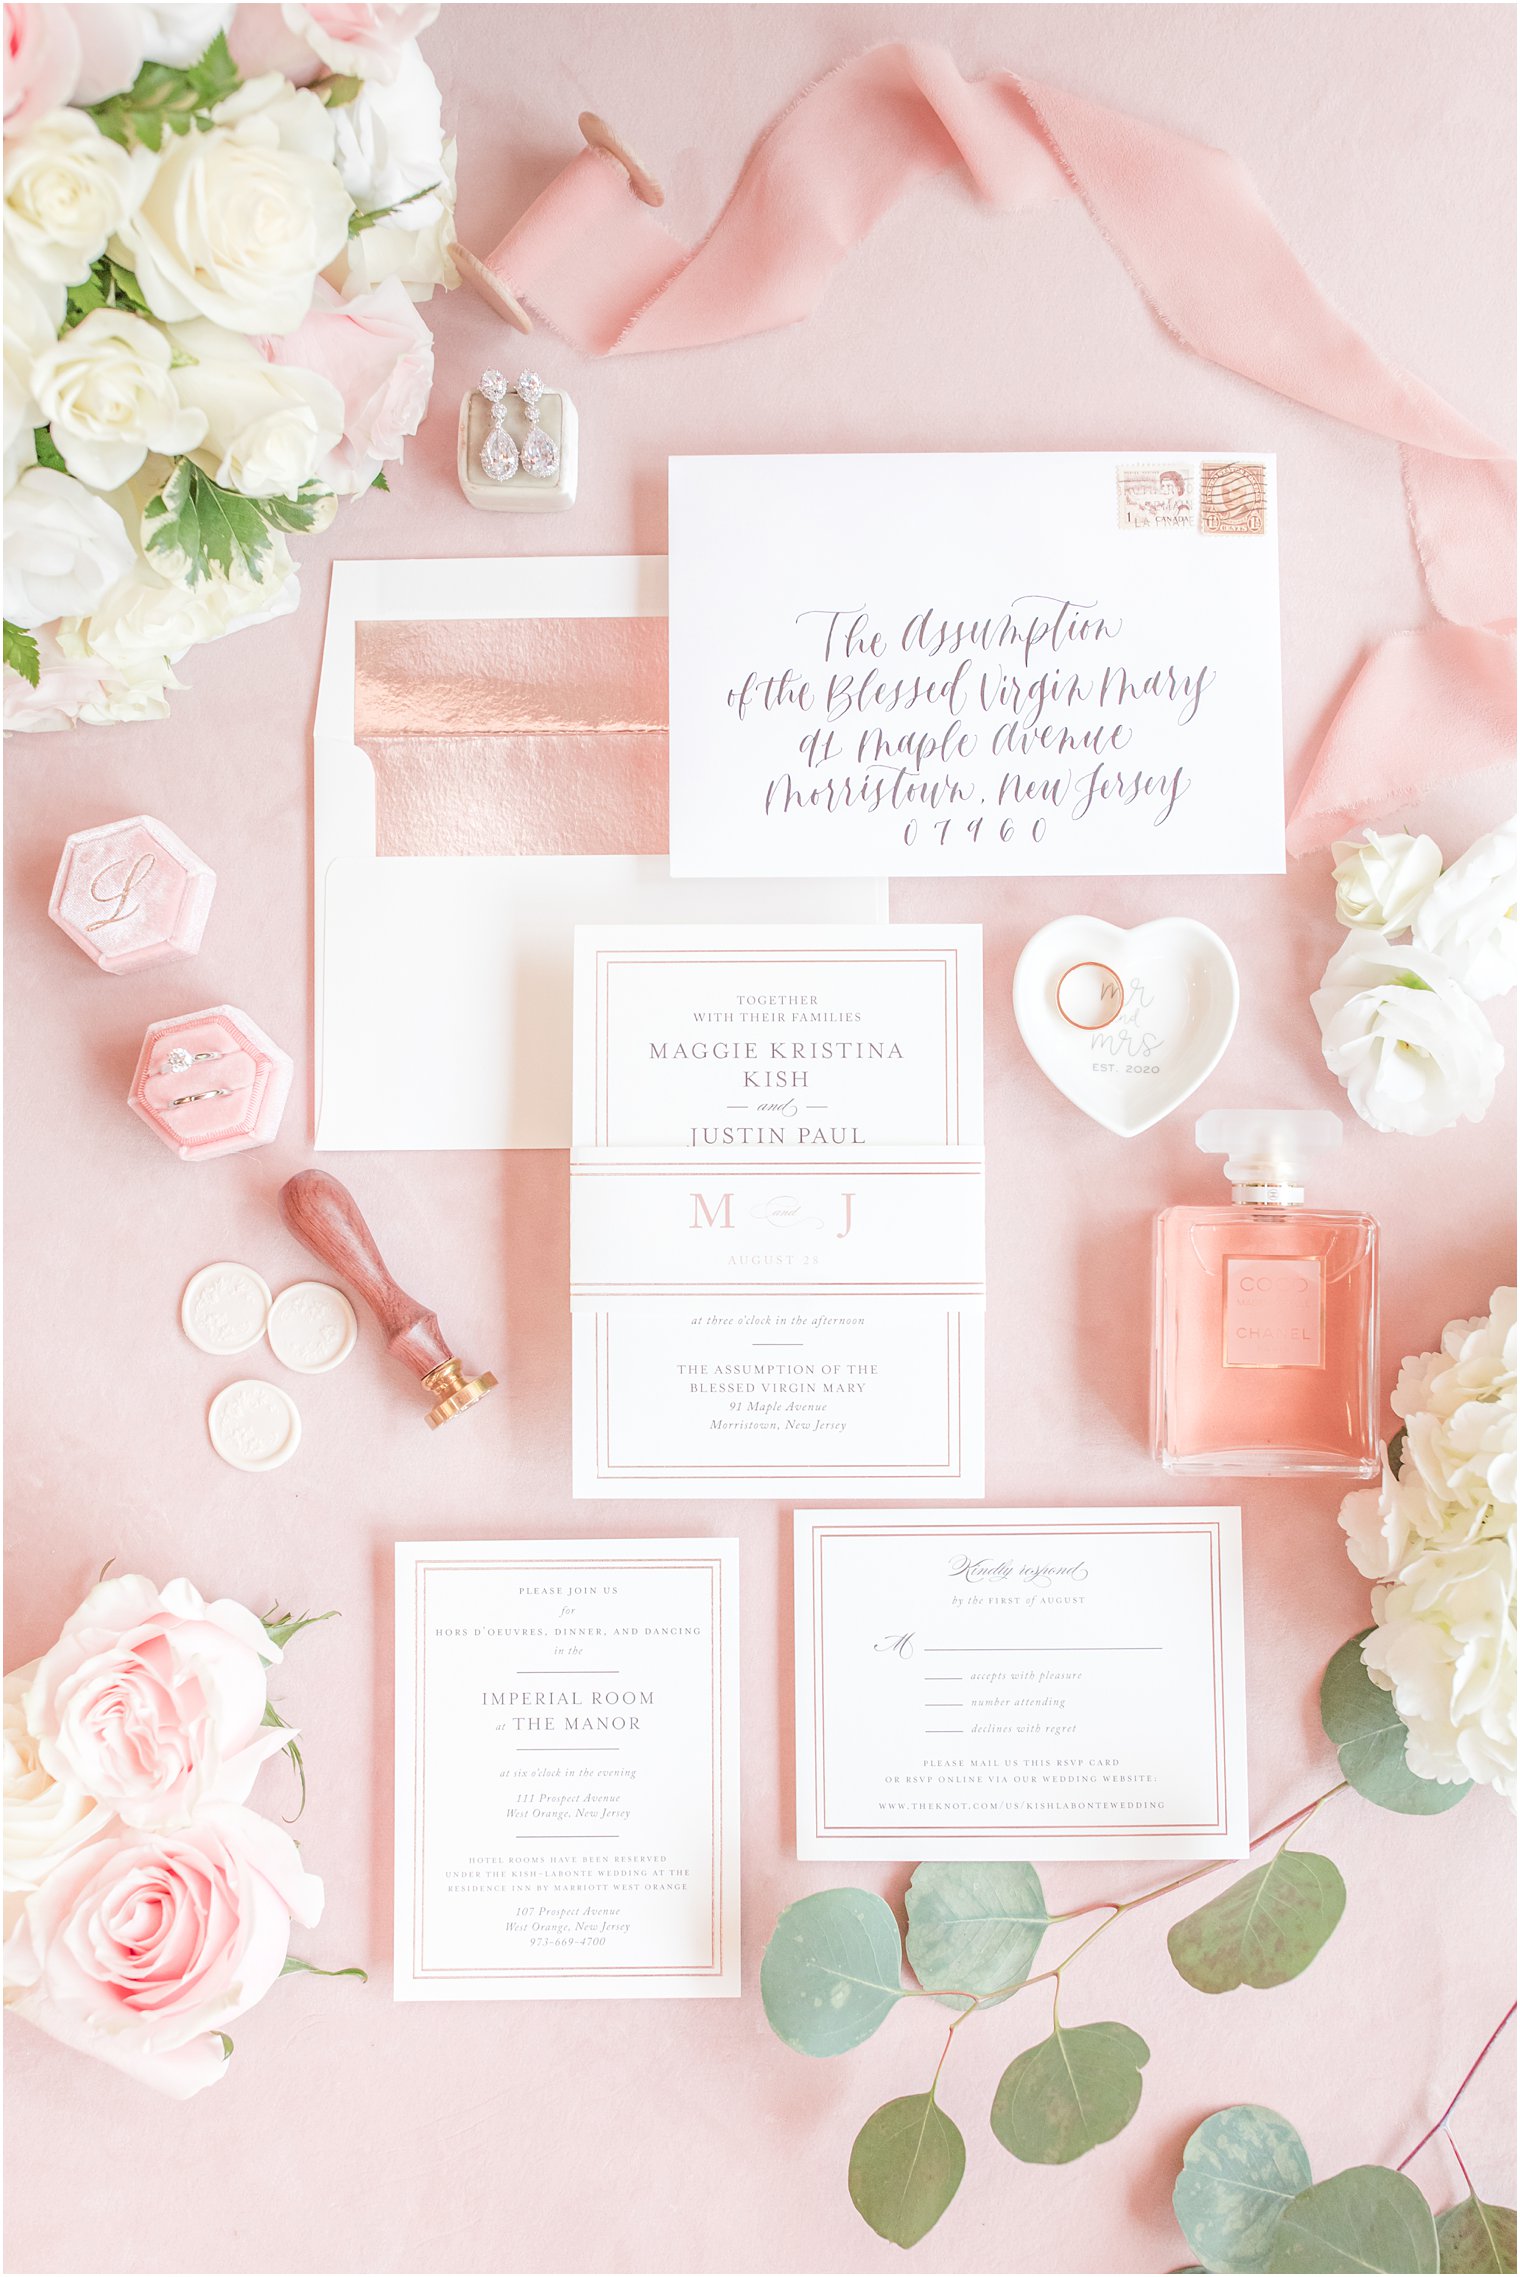 Invitation by Minted; Calligraphy by The Shaded Maple